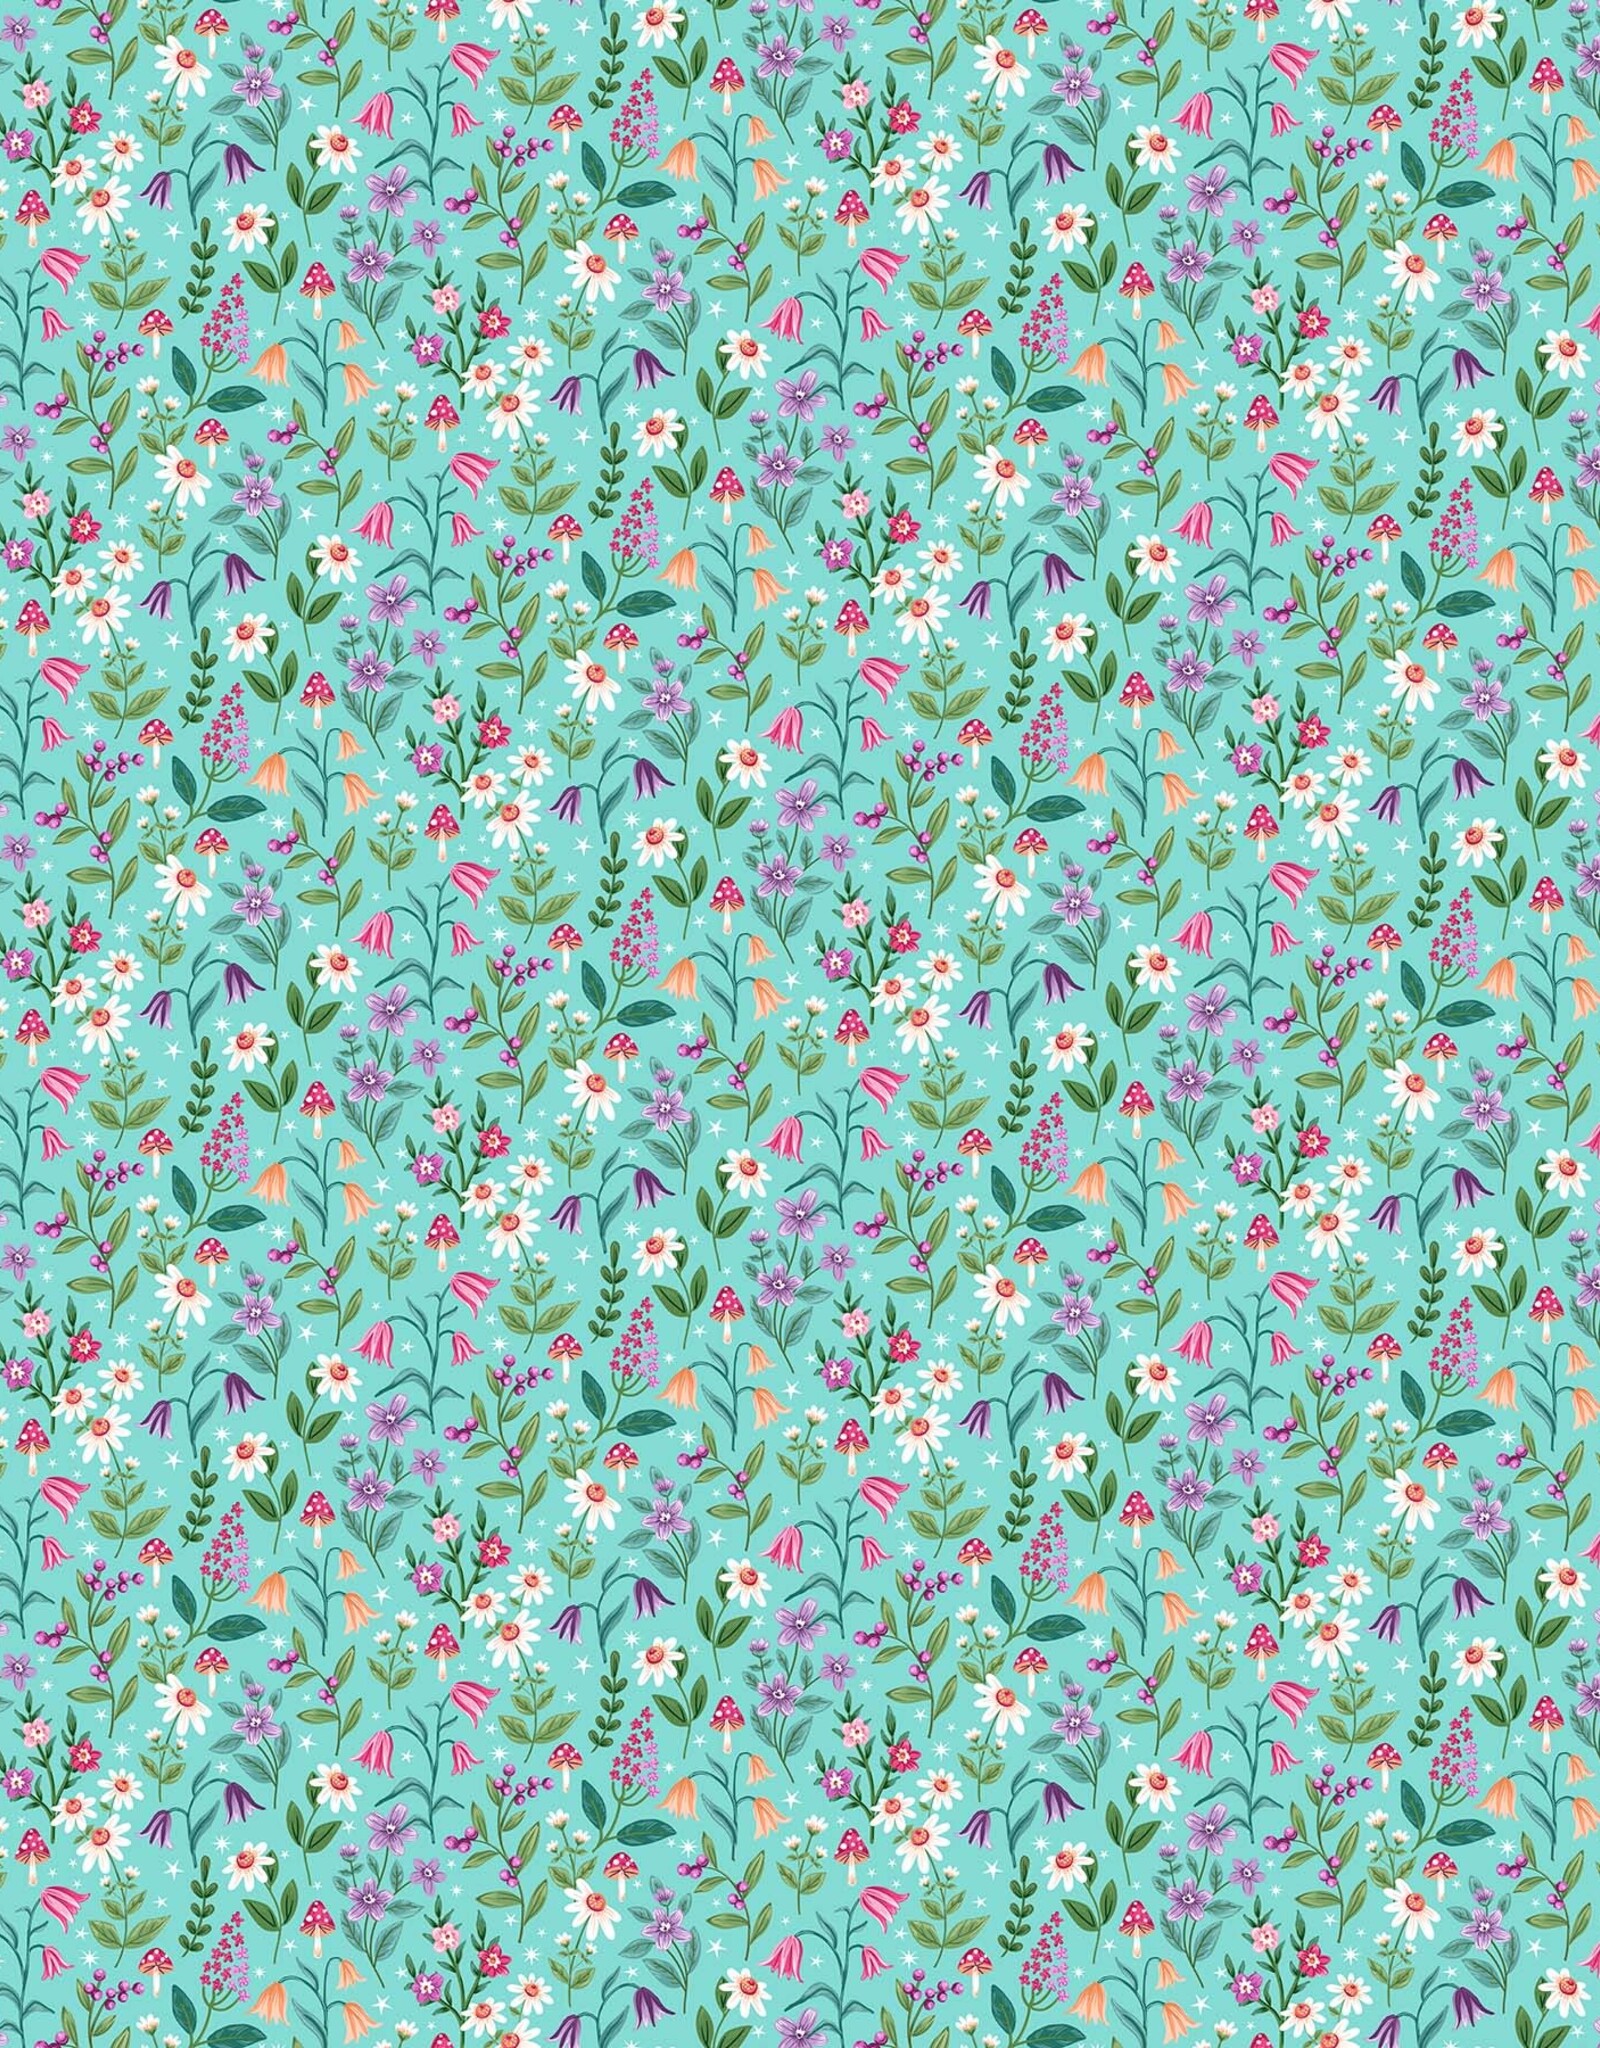 Northcott Unicorn Dreams Packed Flowers Turquoise 26844-64